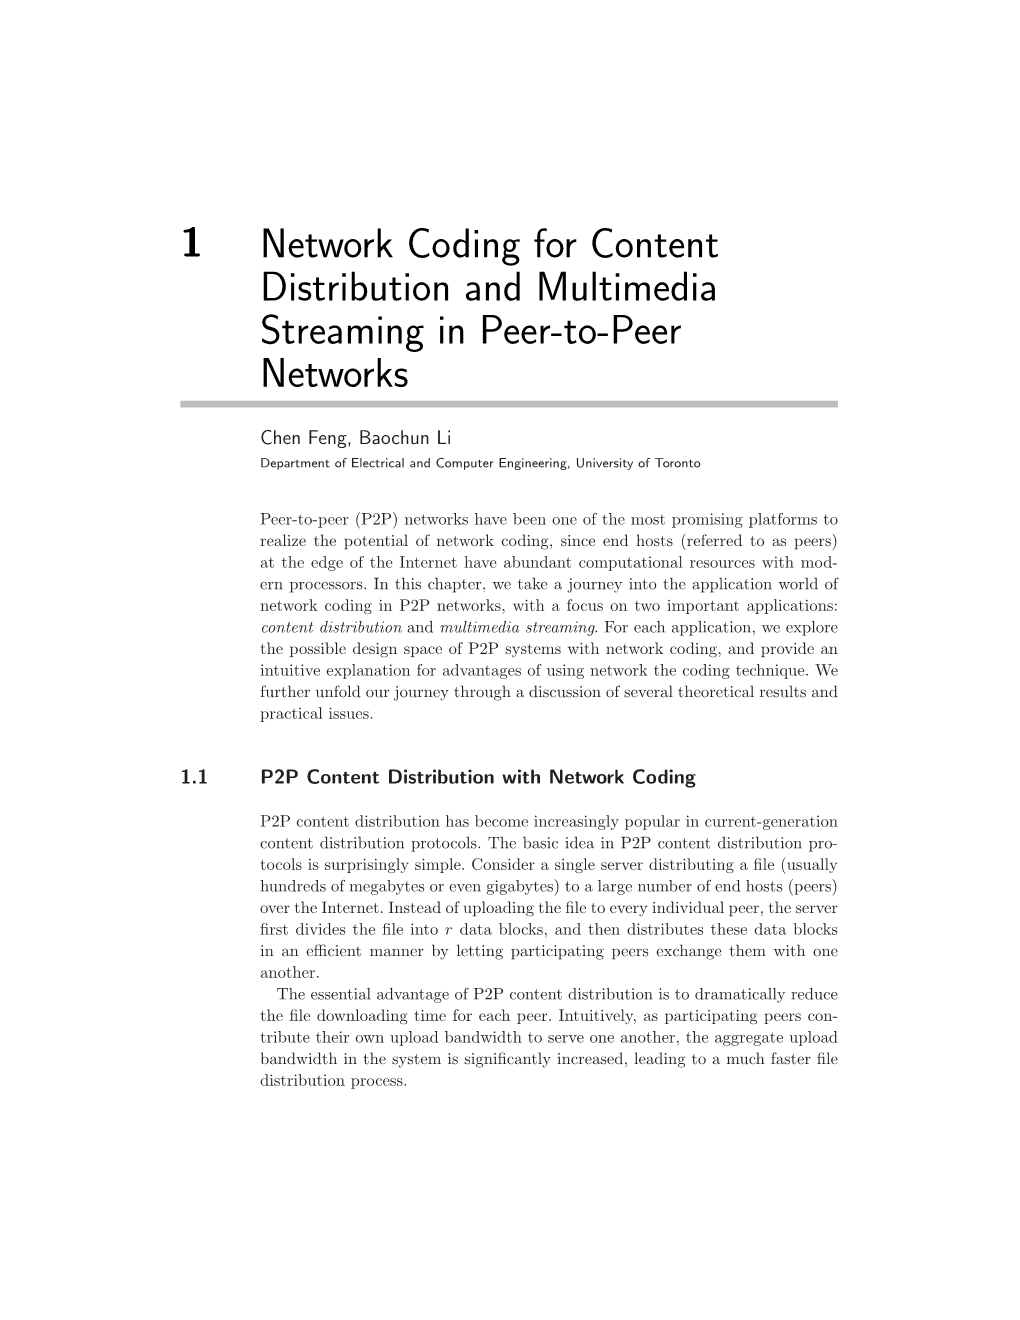 Network Coding for Content Distribution and Multimedia Streaming in Peer-To-Peer Networks